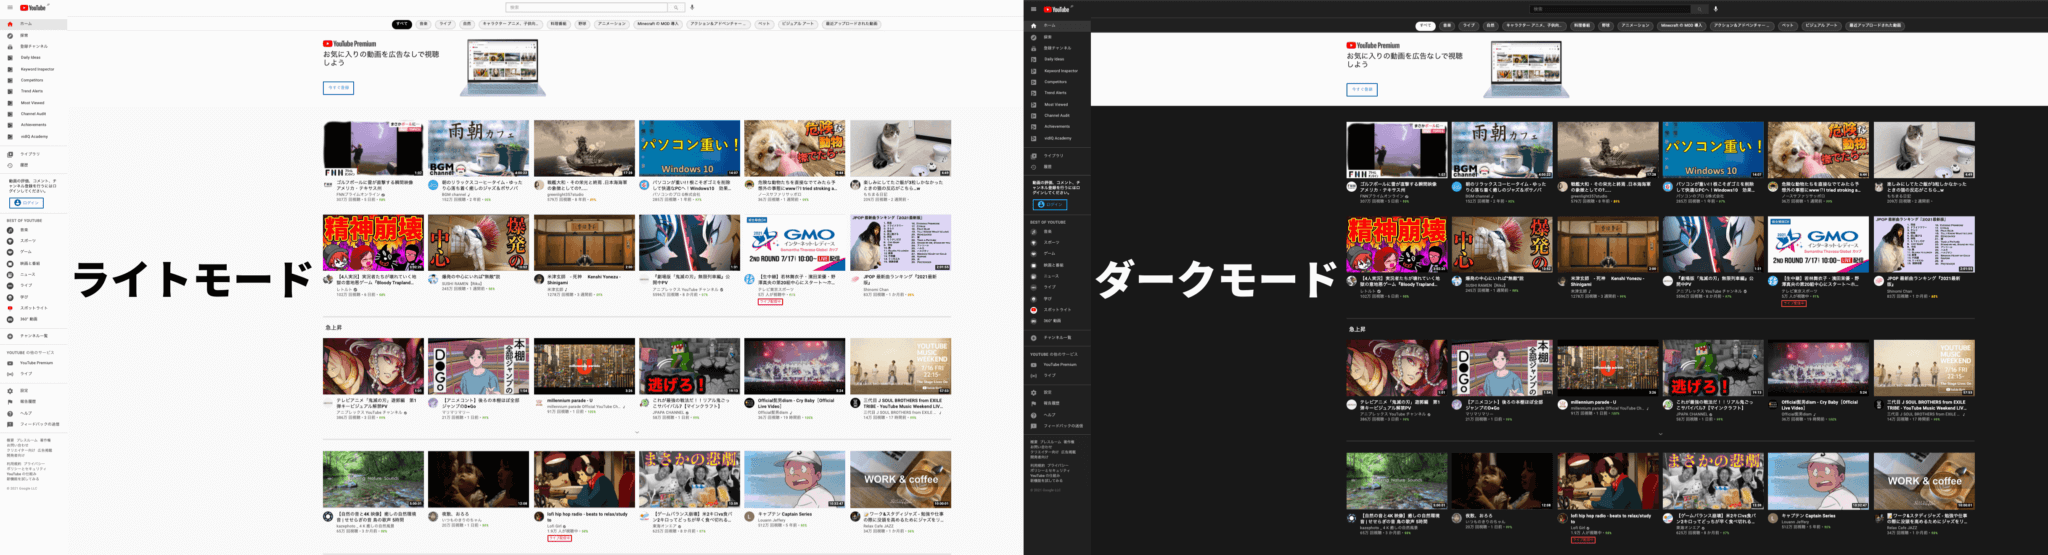 youtube-two design mode